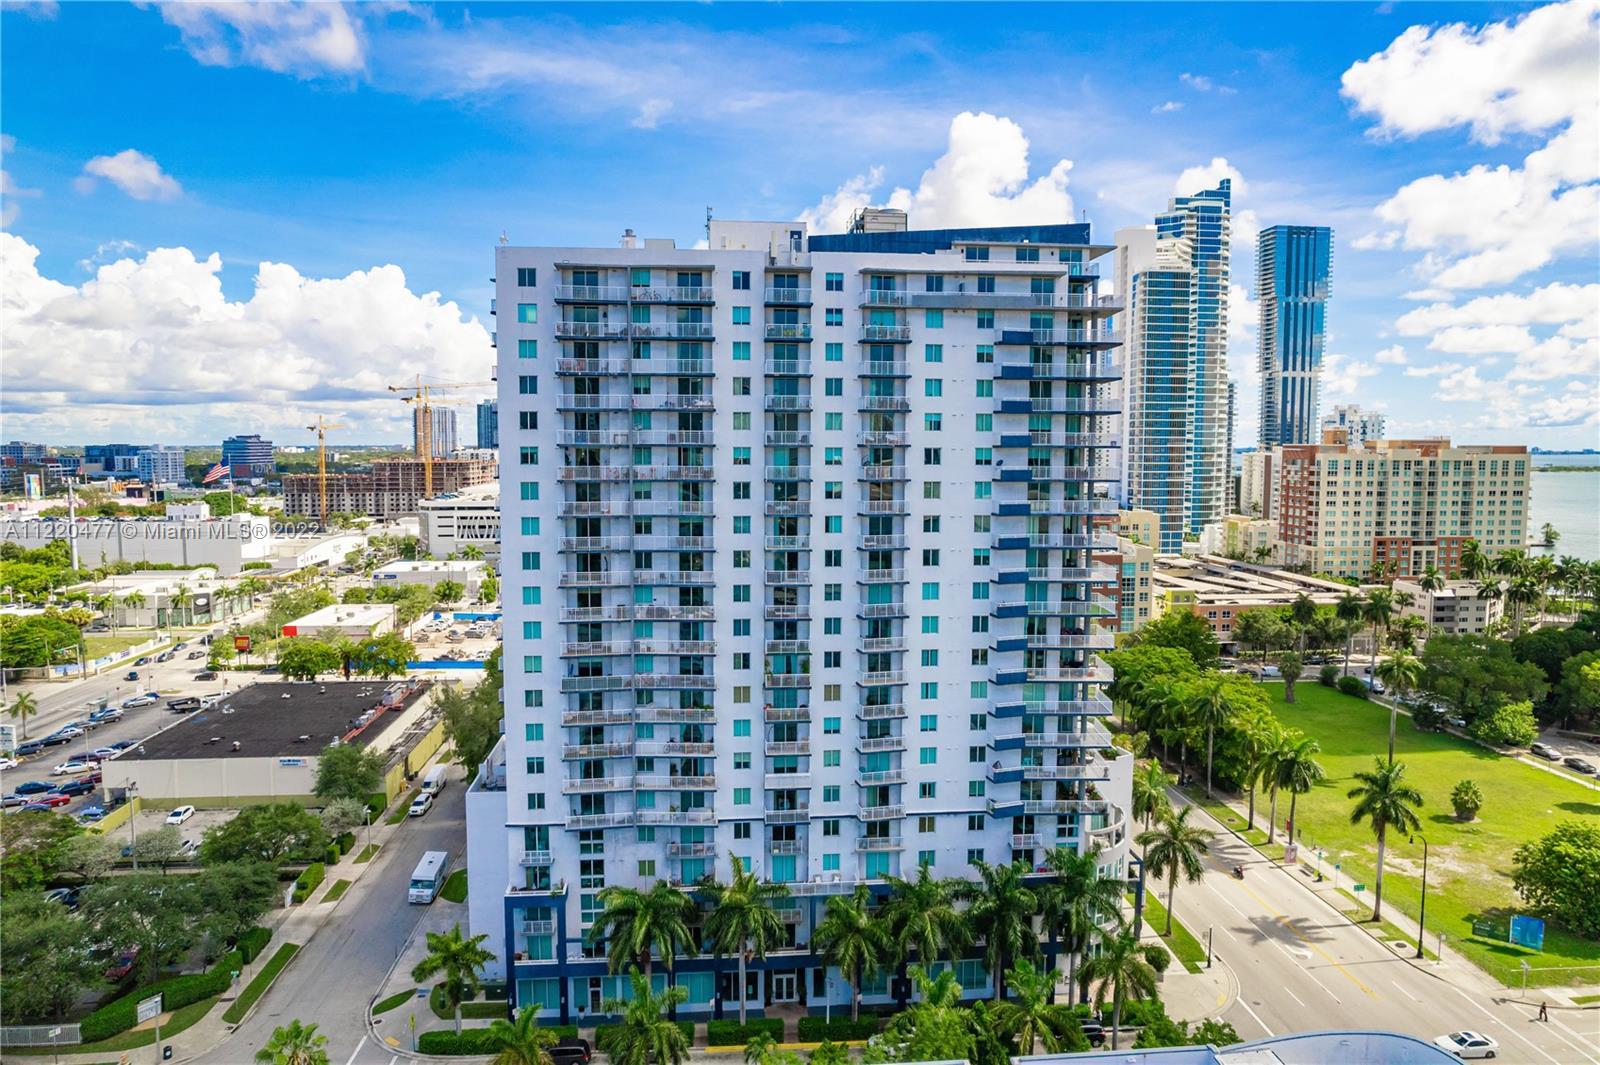 LOCATION, LOCATION, LOCATION! CONDO FOR SALE AT 1800 BISCAYNE PLAZA CONDOMINIMUM. IT OFFERS 2 BEDROO